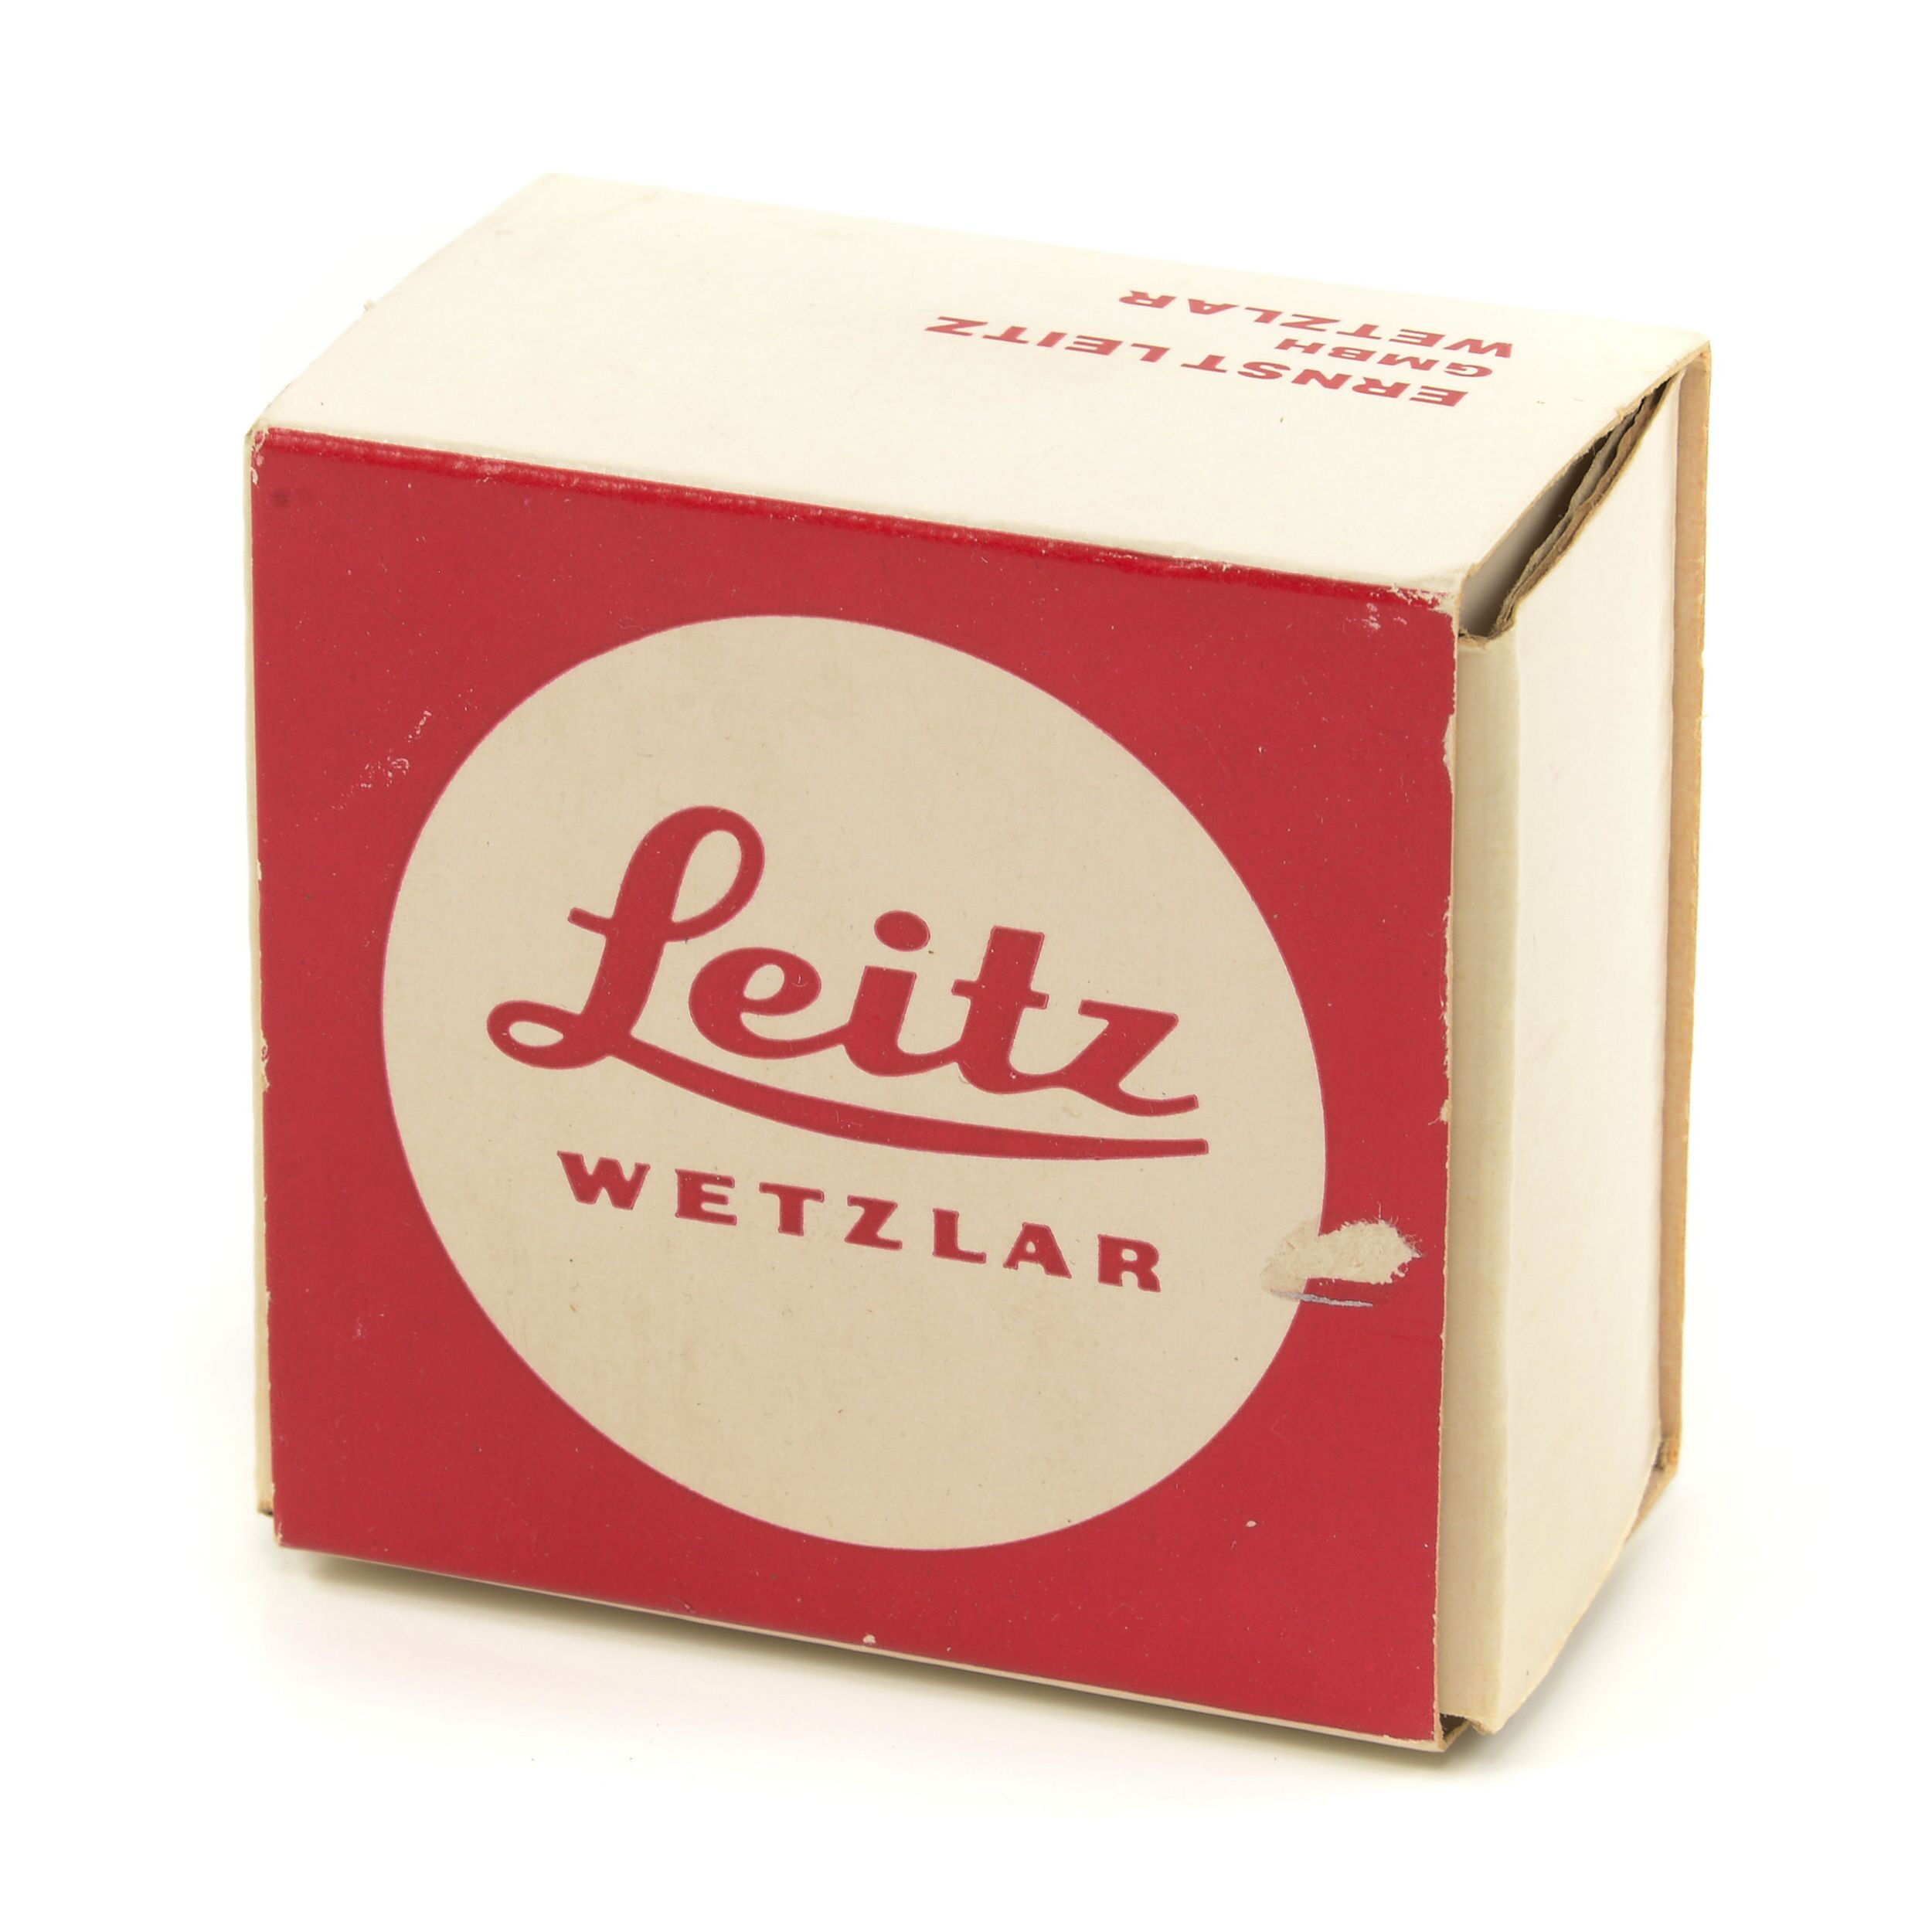 LEITZ 12503 LENS HOOD WITH BOX FOR 50MM F1.2 NOCTILUX EXTREMELY RARE 12503 #4254